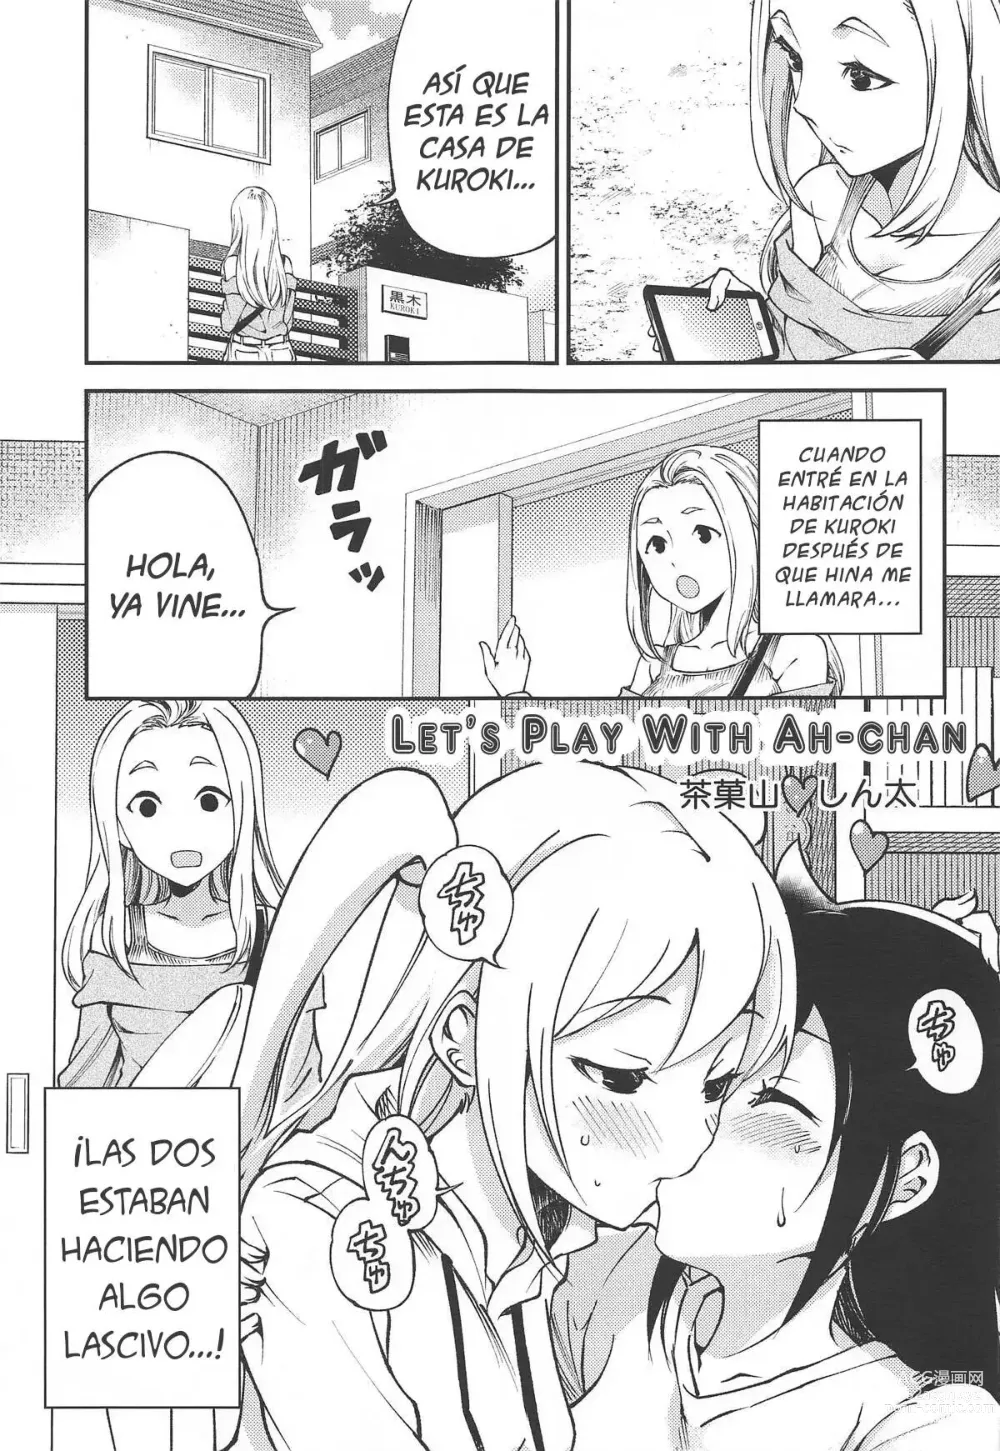 Page 1 of doujinshi Let's Play With Ah-chan